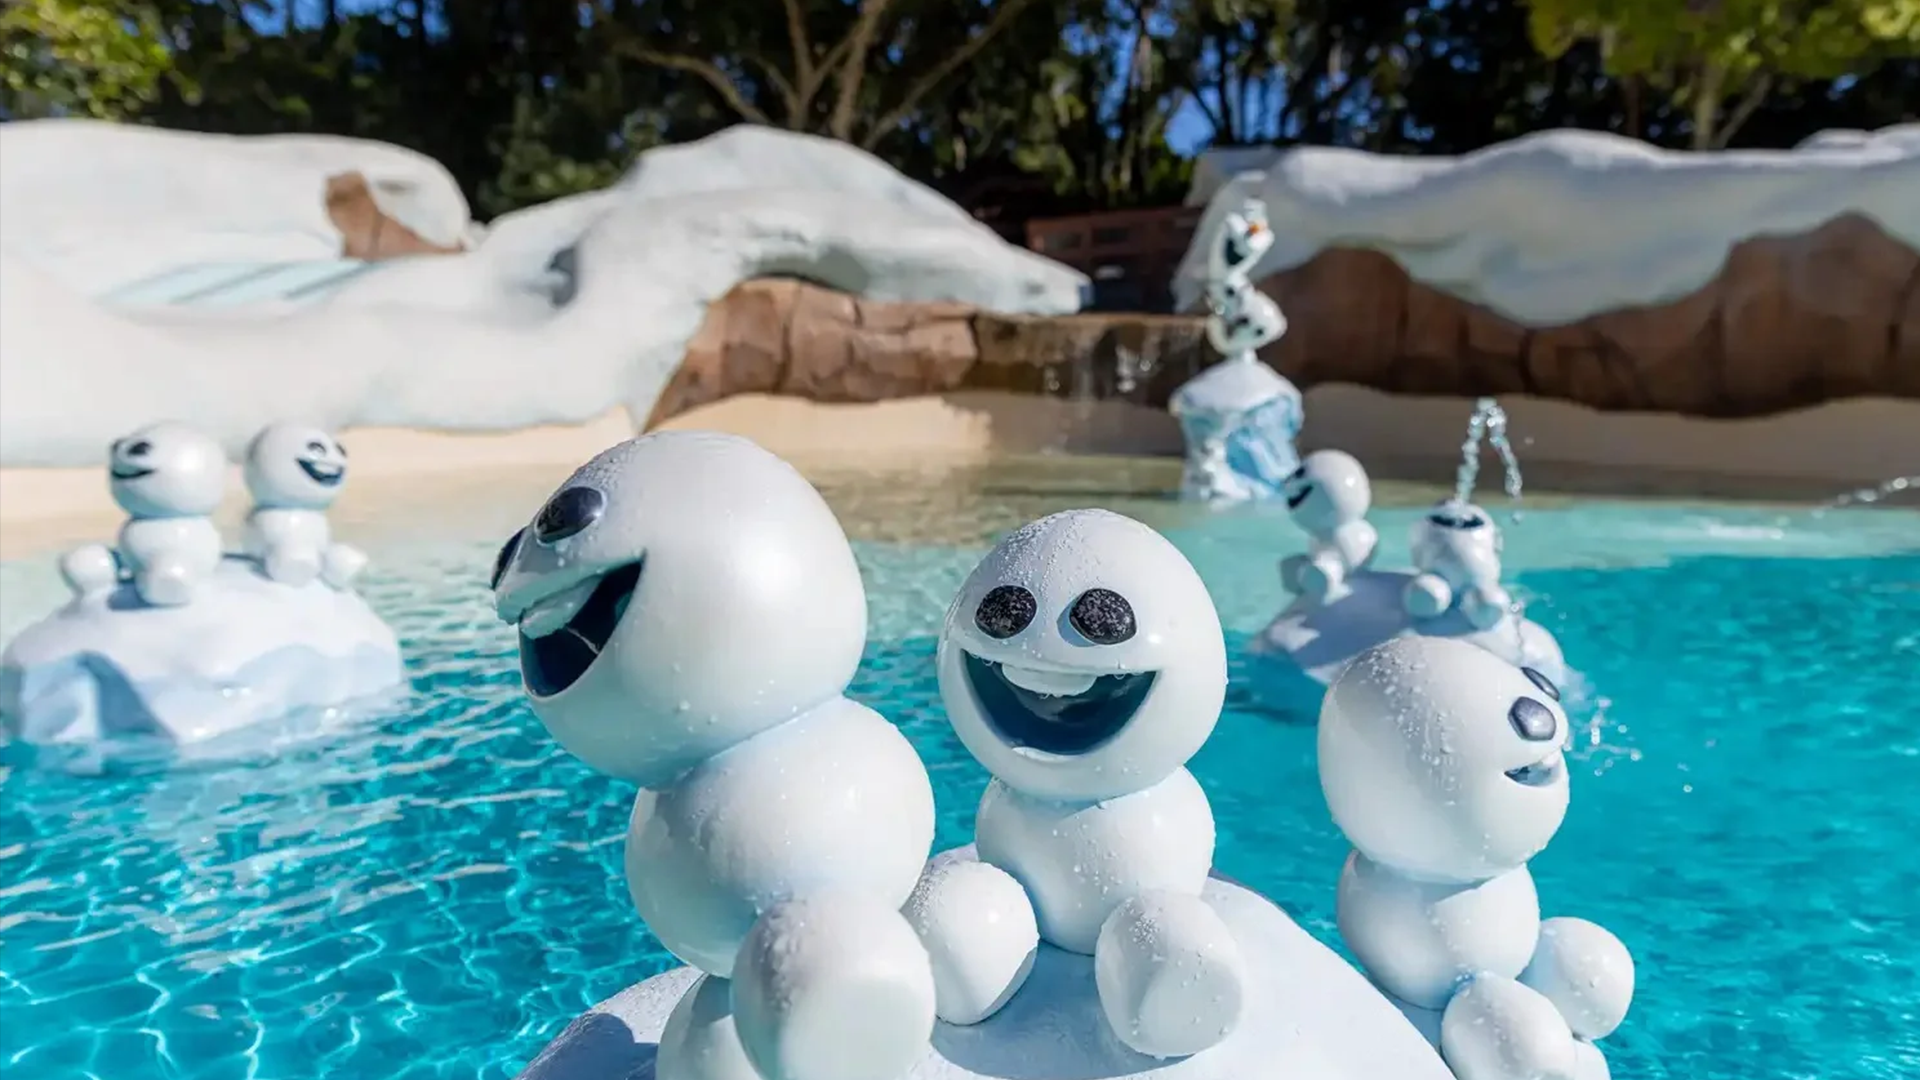 Blizzard Beach Reopening on November 13 with ‘Frozen’ Overlays